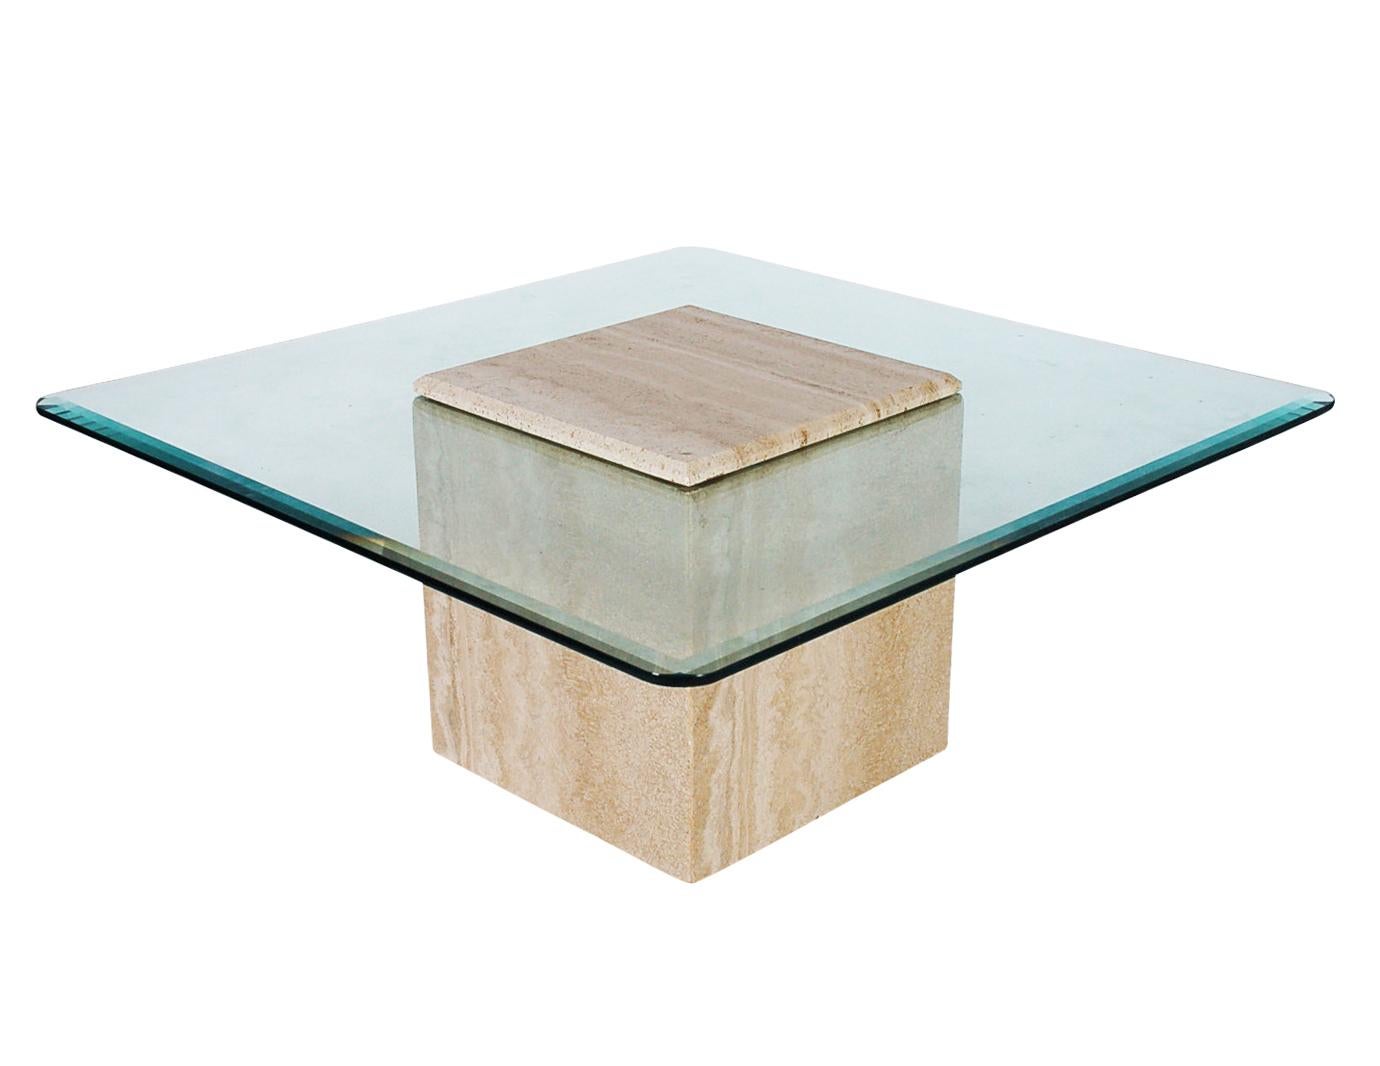 Late 20th Century Mid-Century Modern Italian White Travertine Marble and Glass Cocktail Table